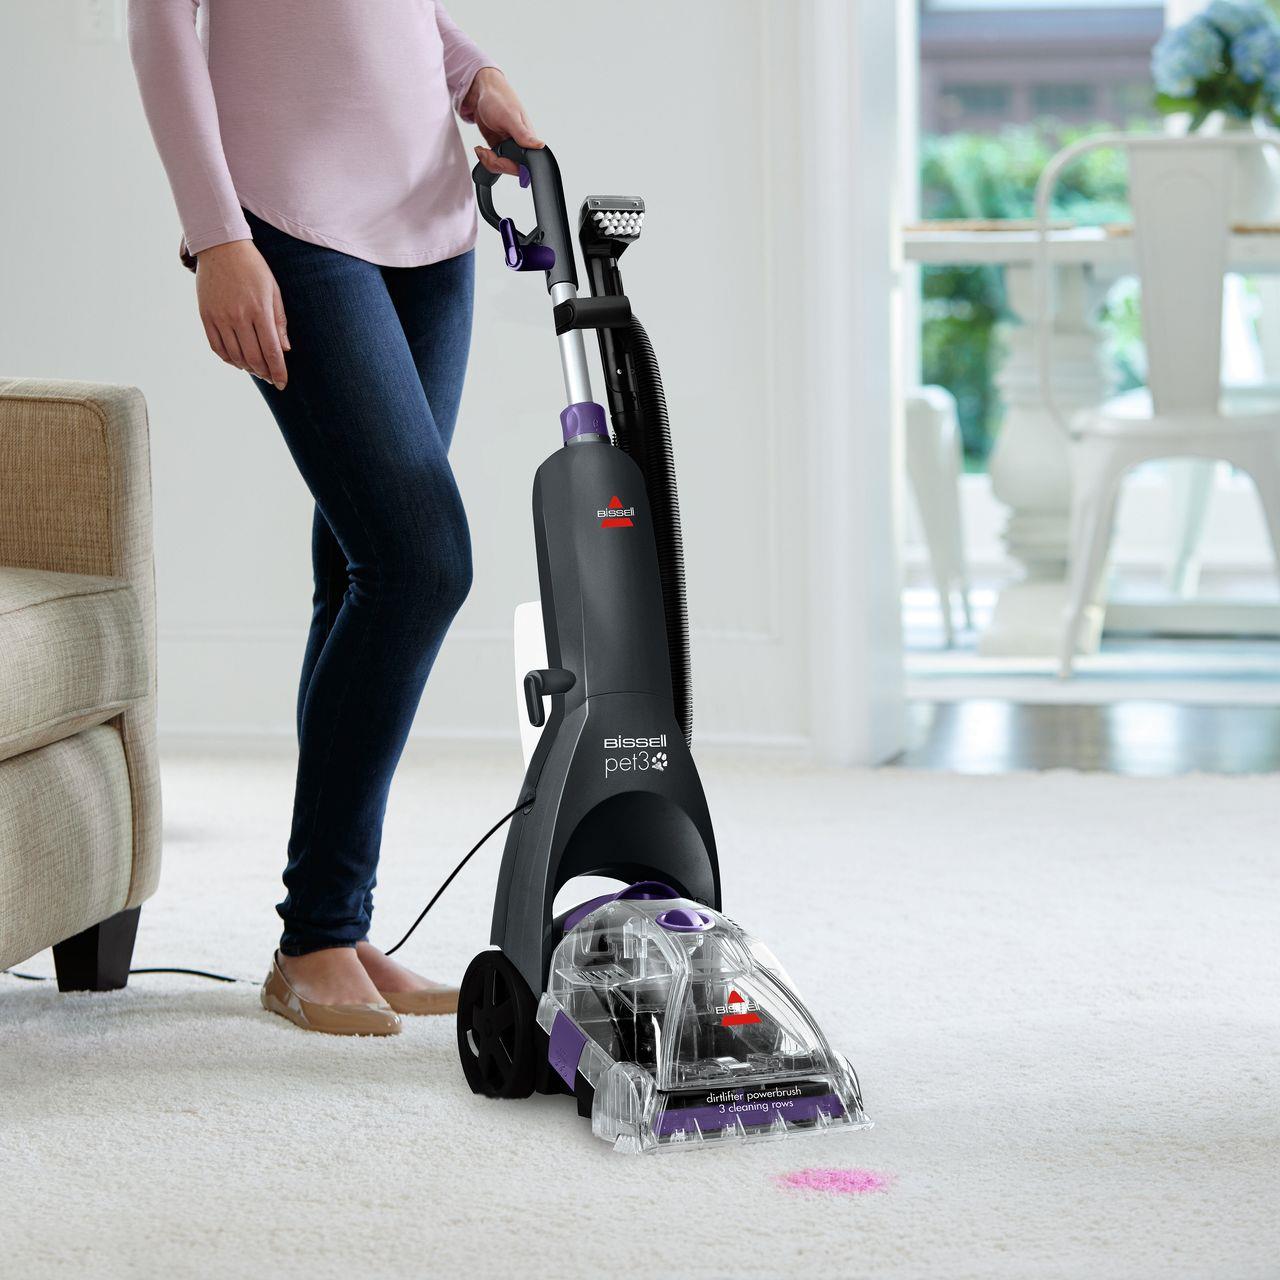 Bissell ReadyClean Pet 3 53W15 Upright Carpet Cleaner